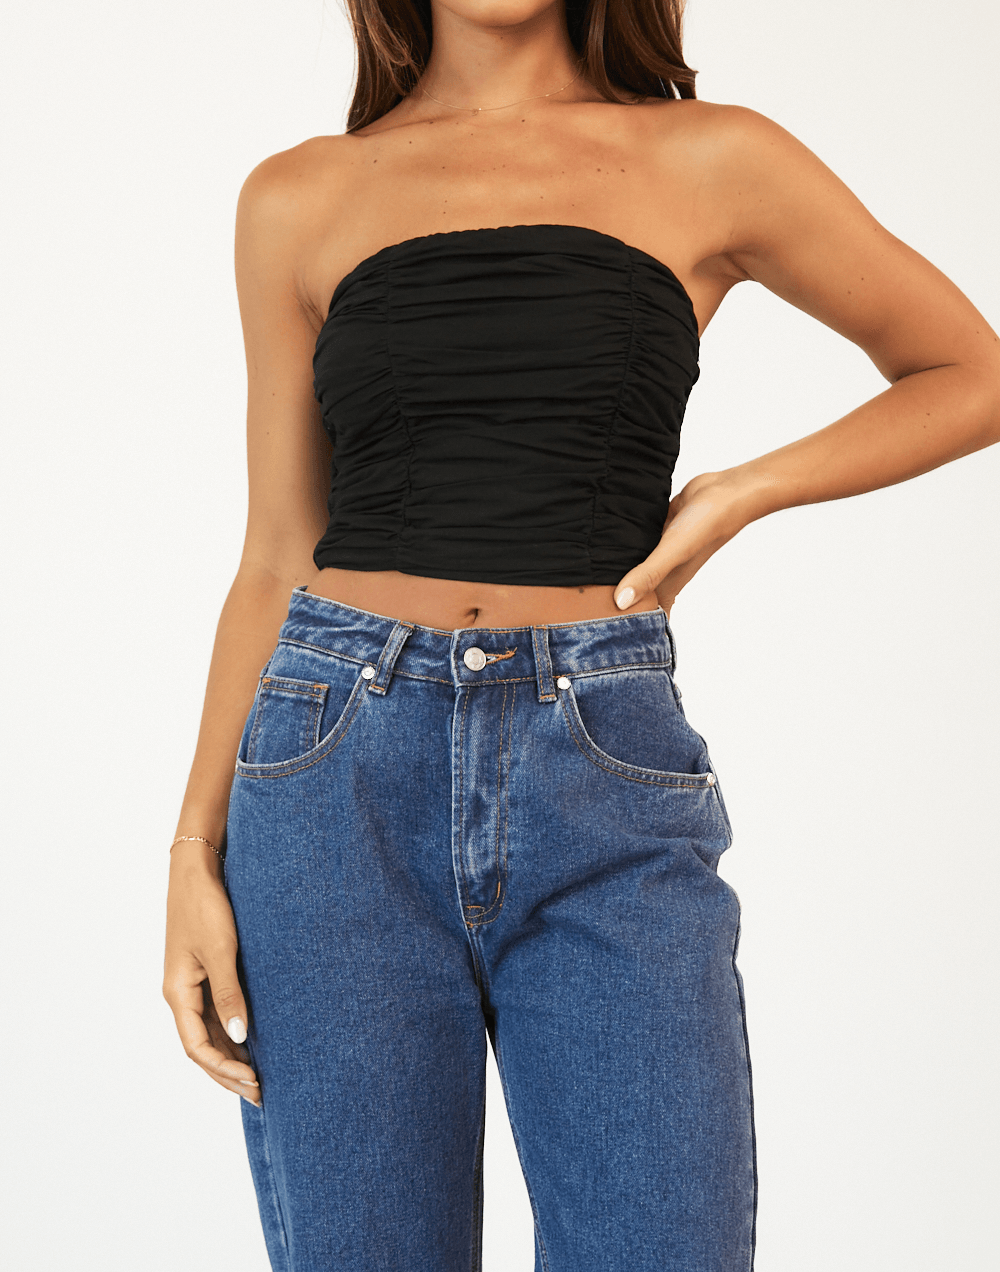 Take Me There Crop Top (Black) - Strapless Ruched Crop Top - Women's Top - Charcoal Clothing